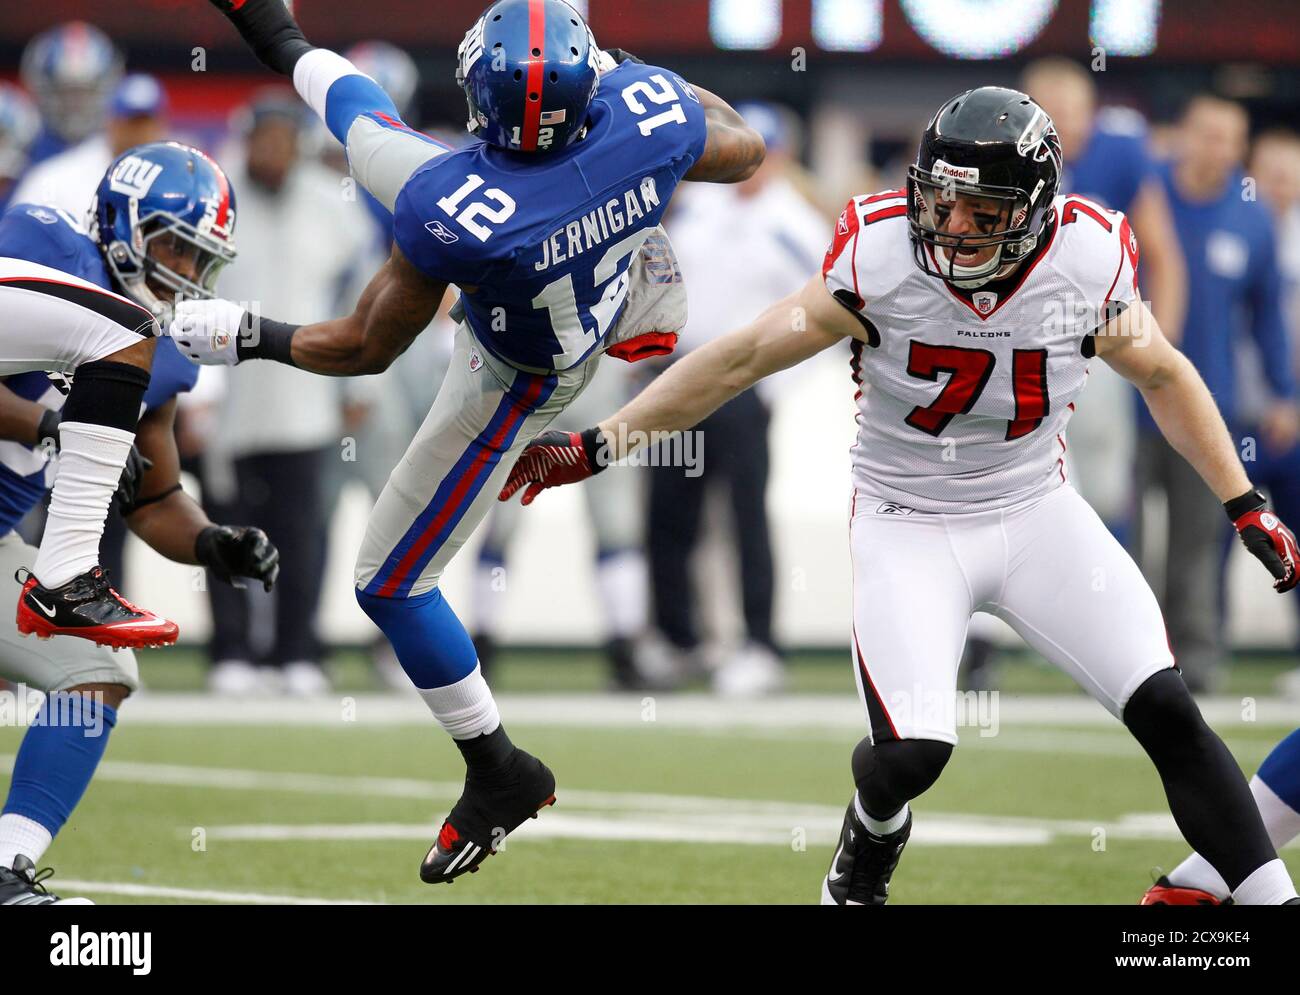 New York Giants wide receiver Jerrel Jernigan (12) is hit by Atlanta Falcons  defensive end Kroy Biermann (71) in the first quarter of their NFL NFC  wildcard playoff football game in East